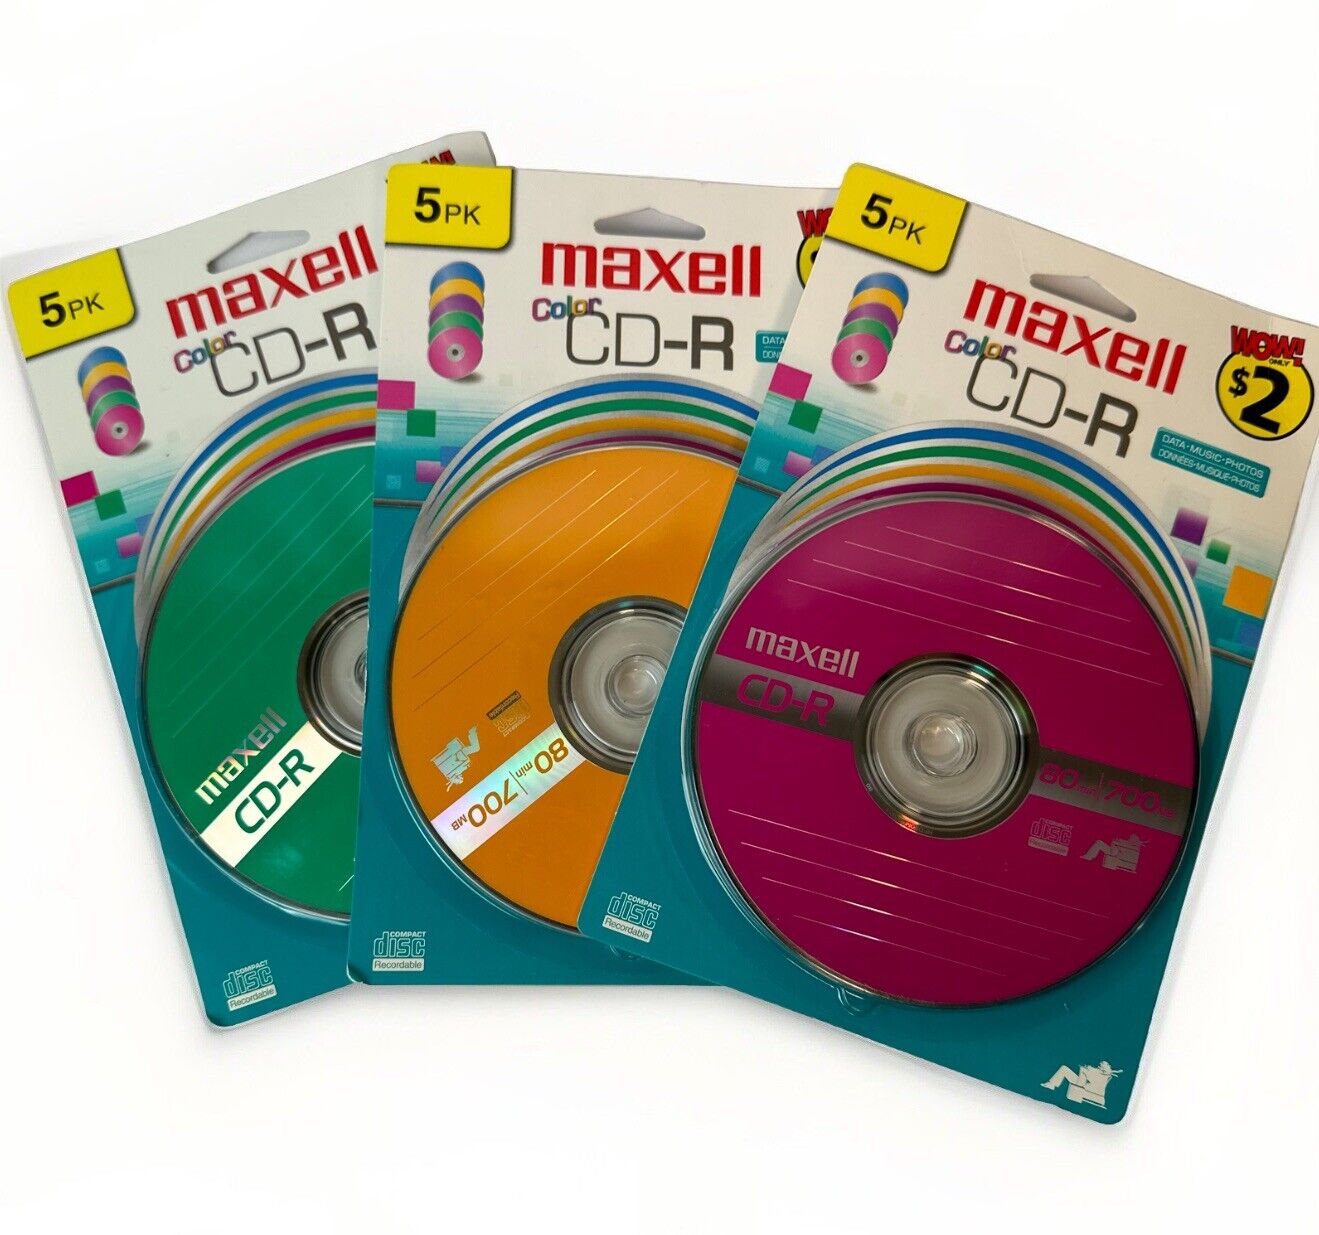 3 Maxell Color CD-R 80 Minute 700MB Blank Disc 5-Pack NEW O10